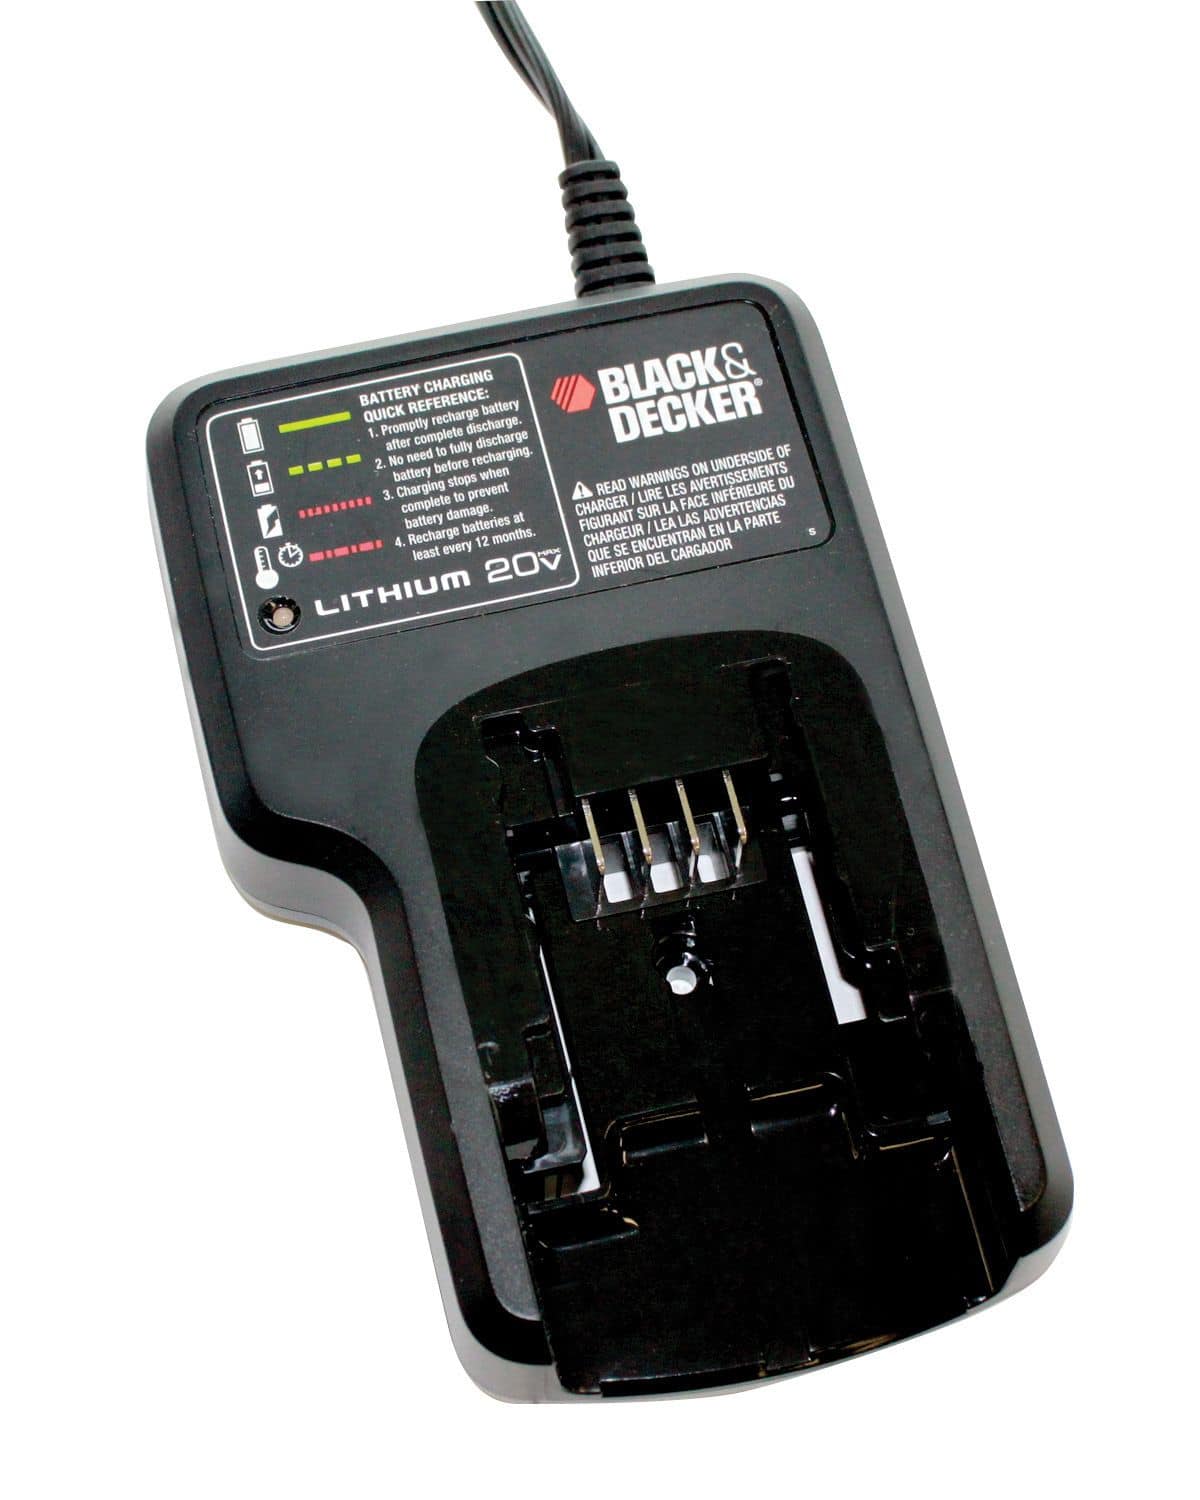 https://media-www.canadiantire.ca/product/fixing/tools/portable-power-tools/0542837/b-d-20v-lith-ion-charger-c33c7145-f593-4182-ba6d-dce8693bc6ef-jpgrendition.jpg